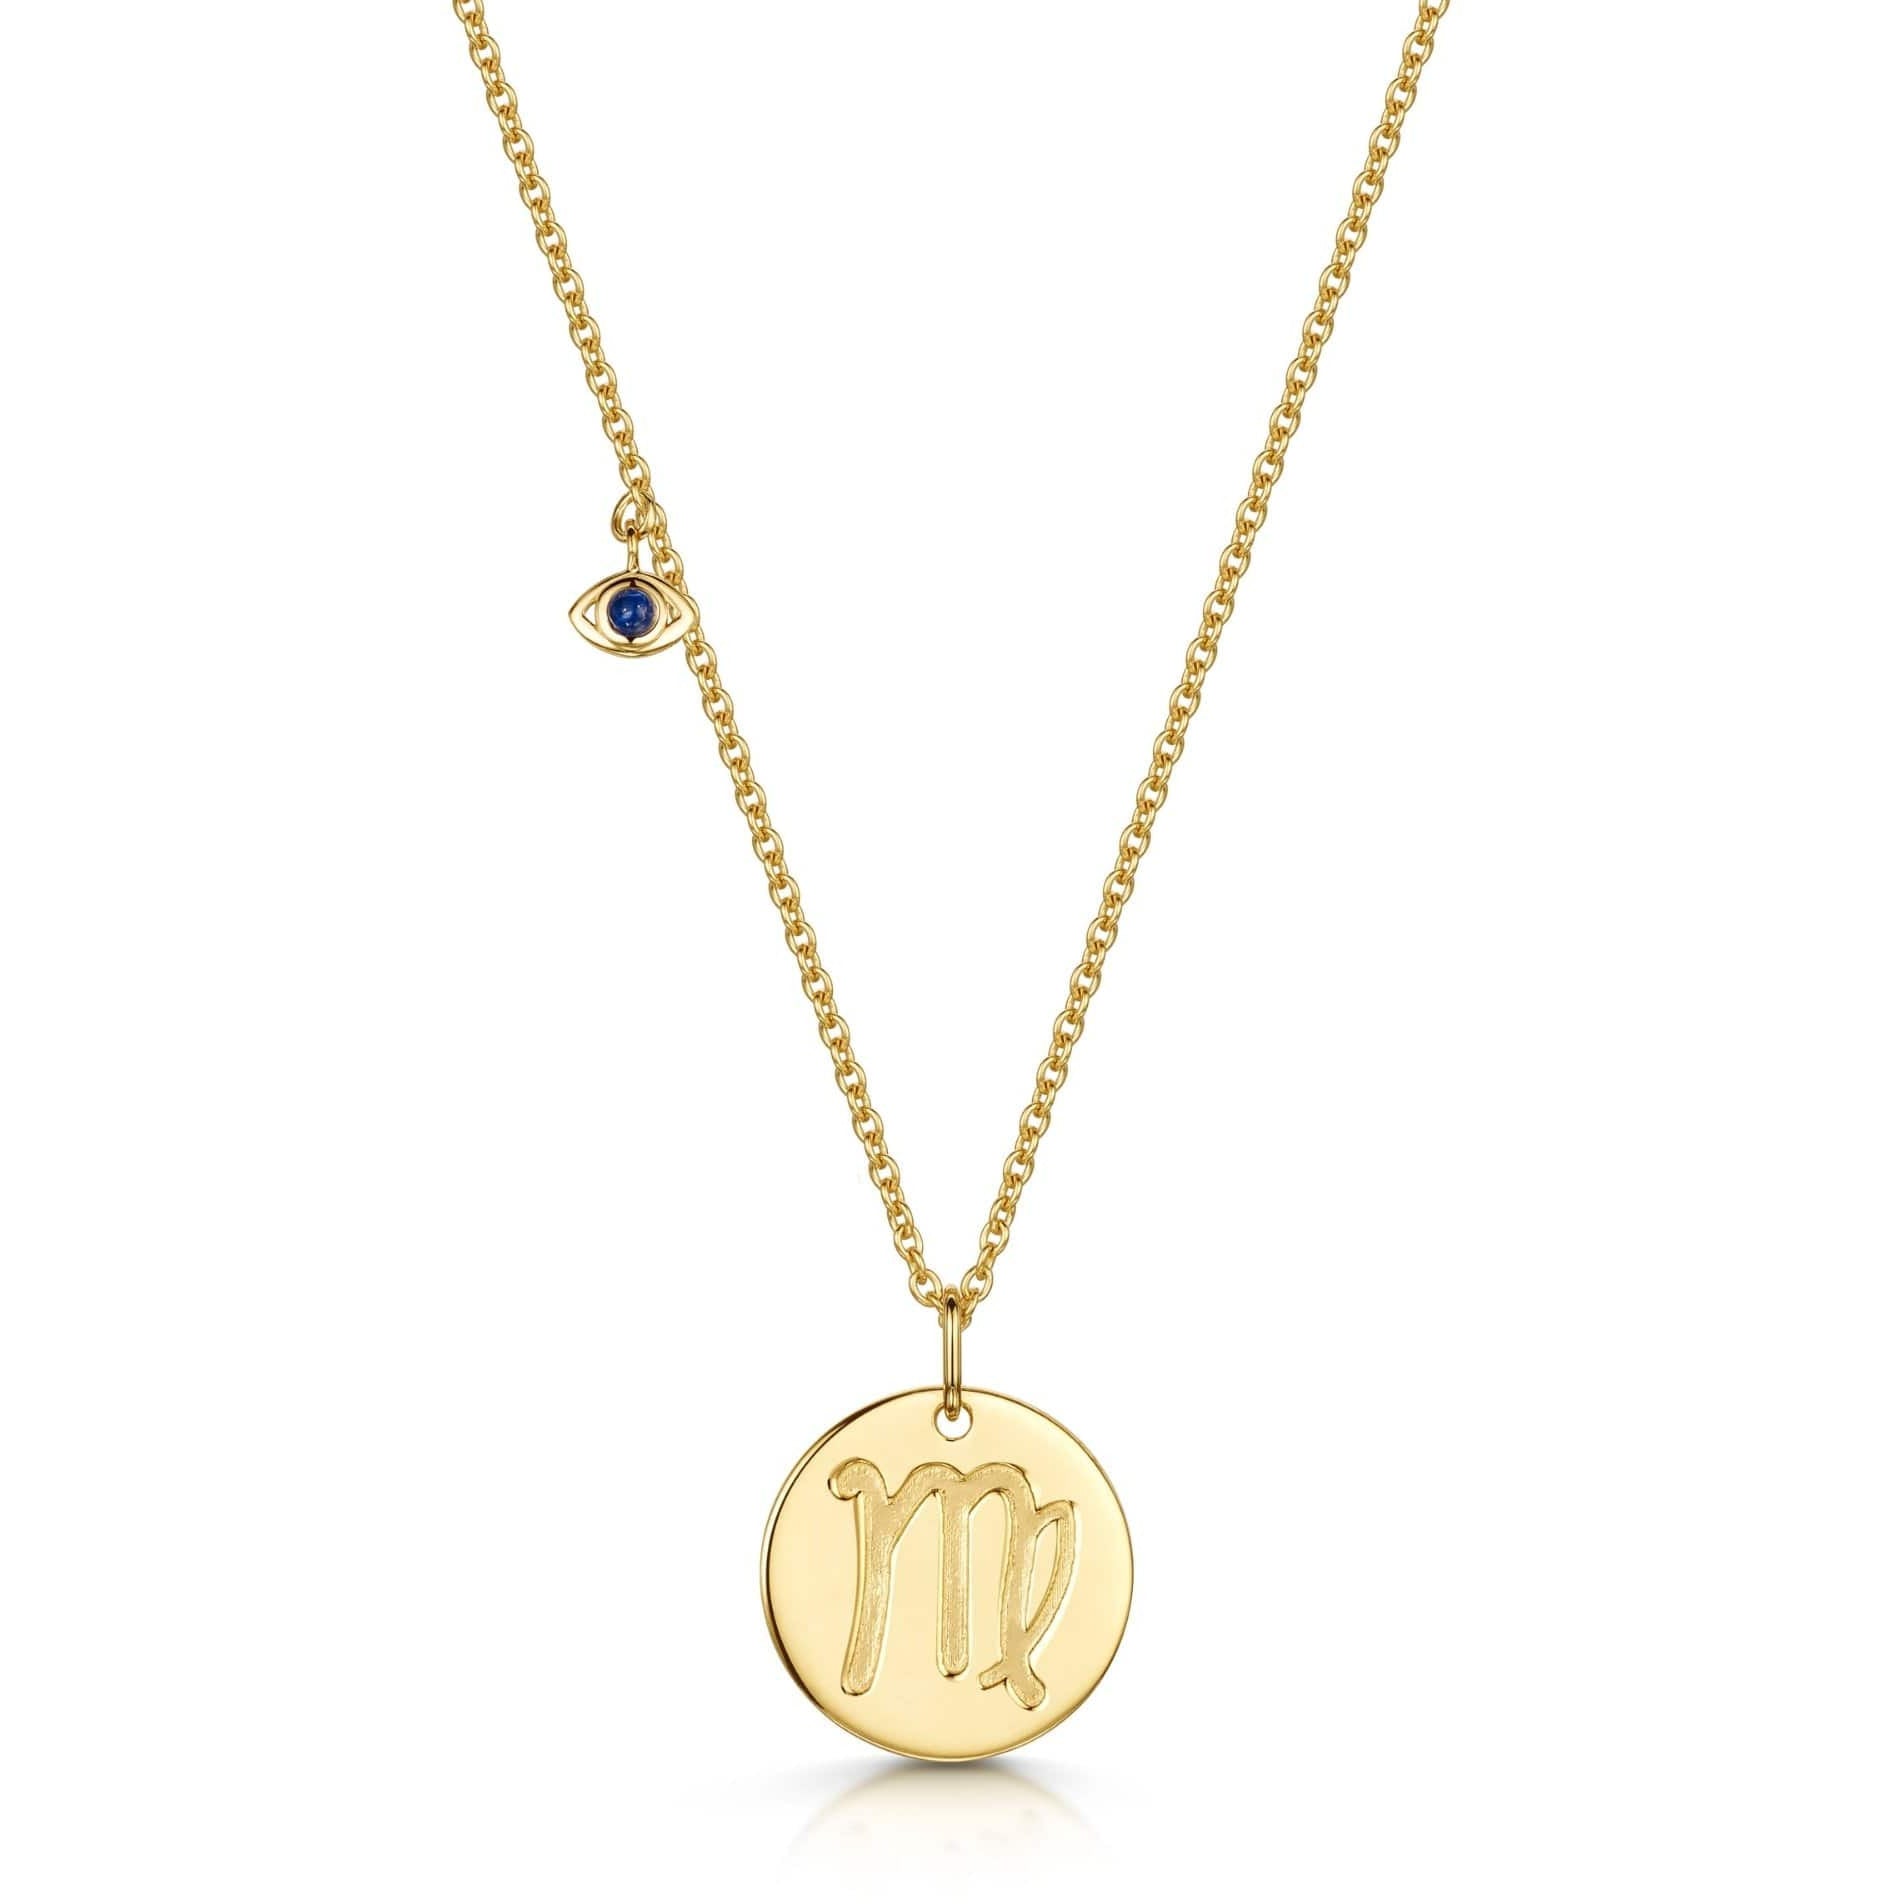 Fervor Montreal Necklace Virgo Double-Sided Zodiac & Constellation Necklace